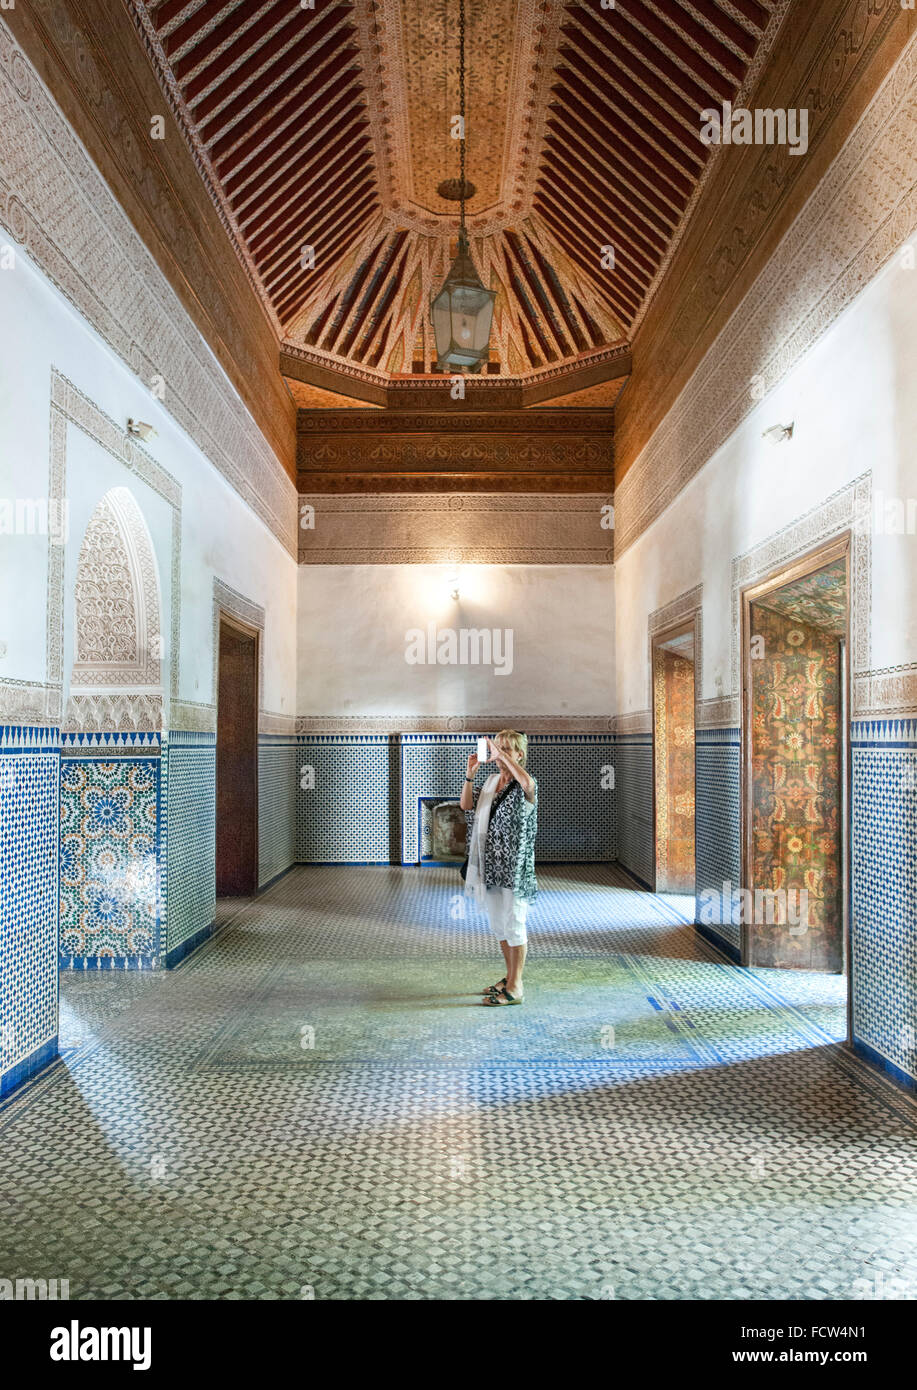 Interior and ceiling in one of the rooms of the Bahia Palace in Marrakech, Morocco. Stock Photo